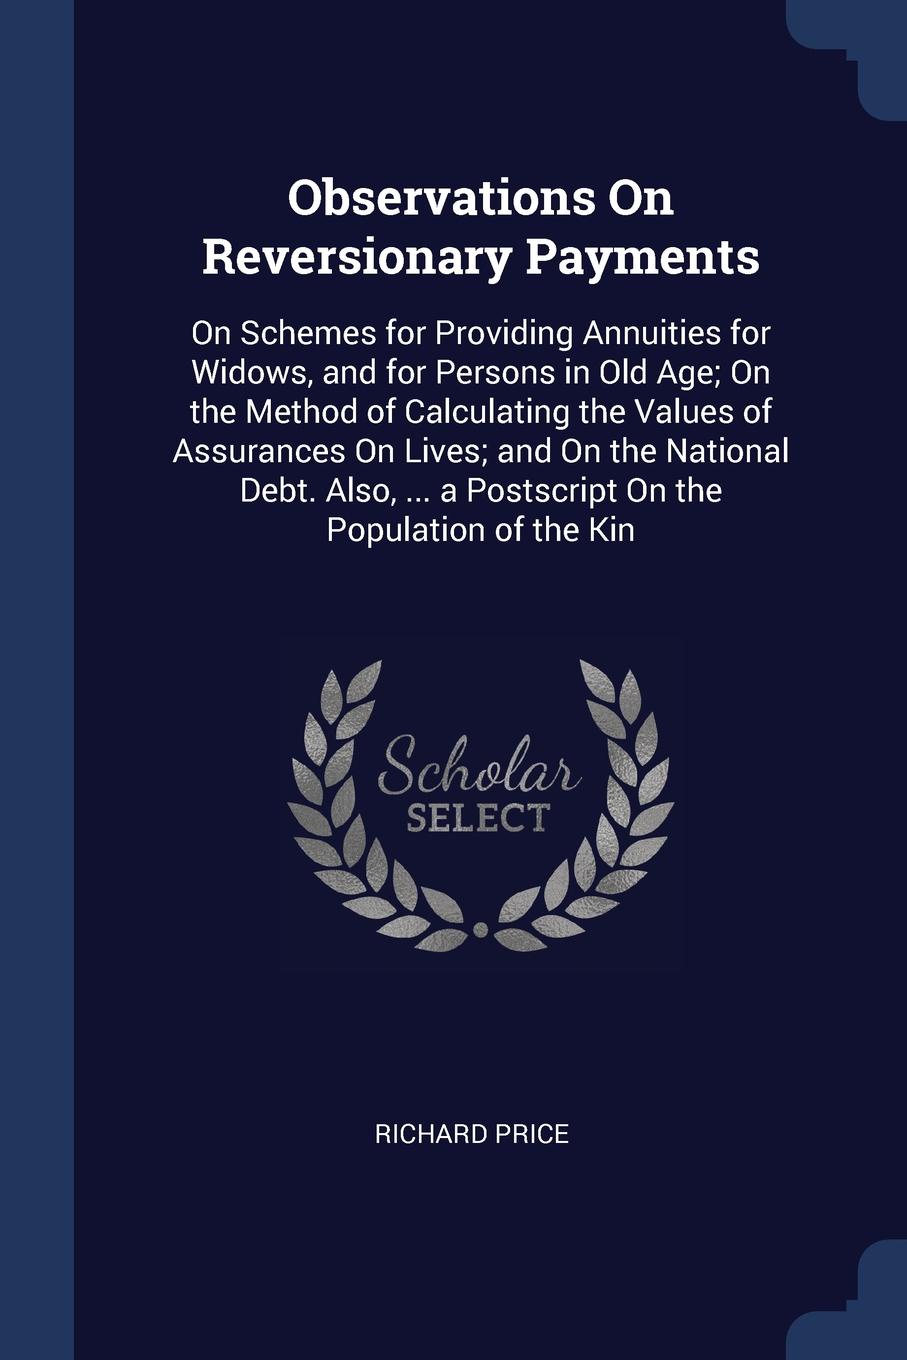 Observations On Reversionary Payments. On Schemes for Providing Annuities for Widows, and for Persons in Old Age; On the Method of Calculating the Values of Assurances On Lives; and On the National Debt. Also, ... a Postscript On the Population of...